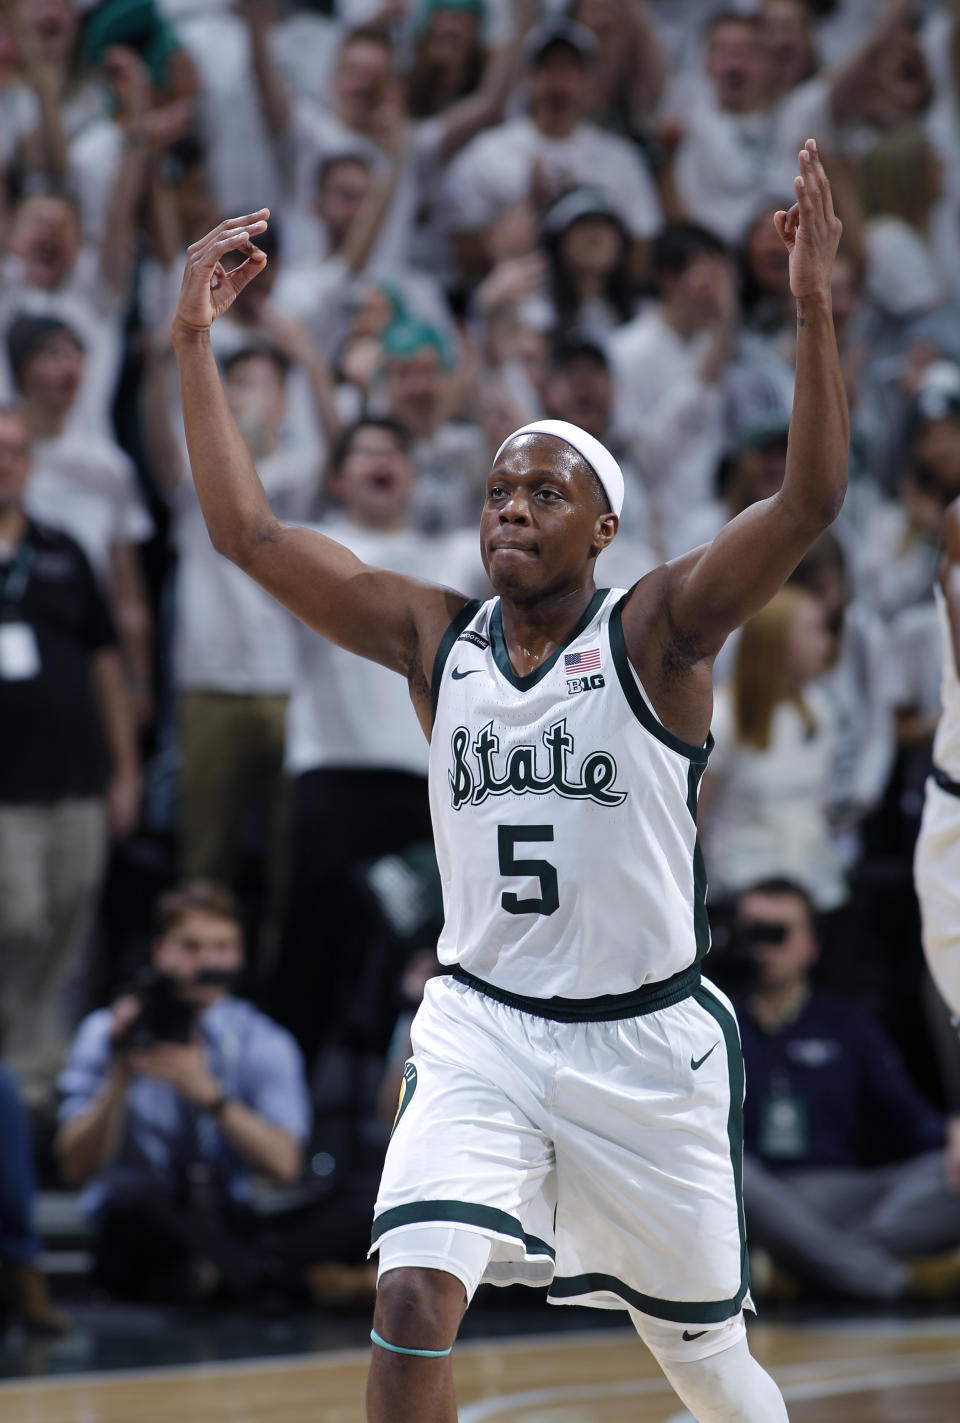 Michigan State's Cassius Winston reacts after sinking a three-point basket against Michigan during the second half of an NCAA college basketball game, Sunday, Jan. 5, 2020, in East Lansing, Mich. (AP Photo/Al Goldis)